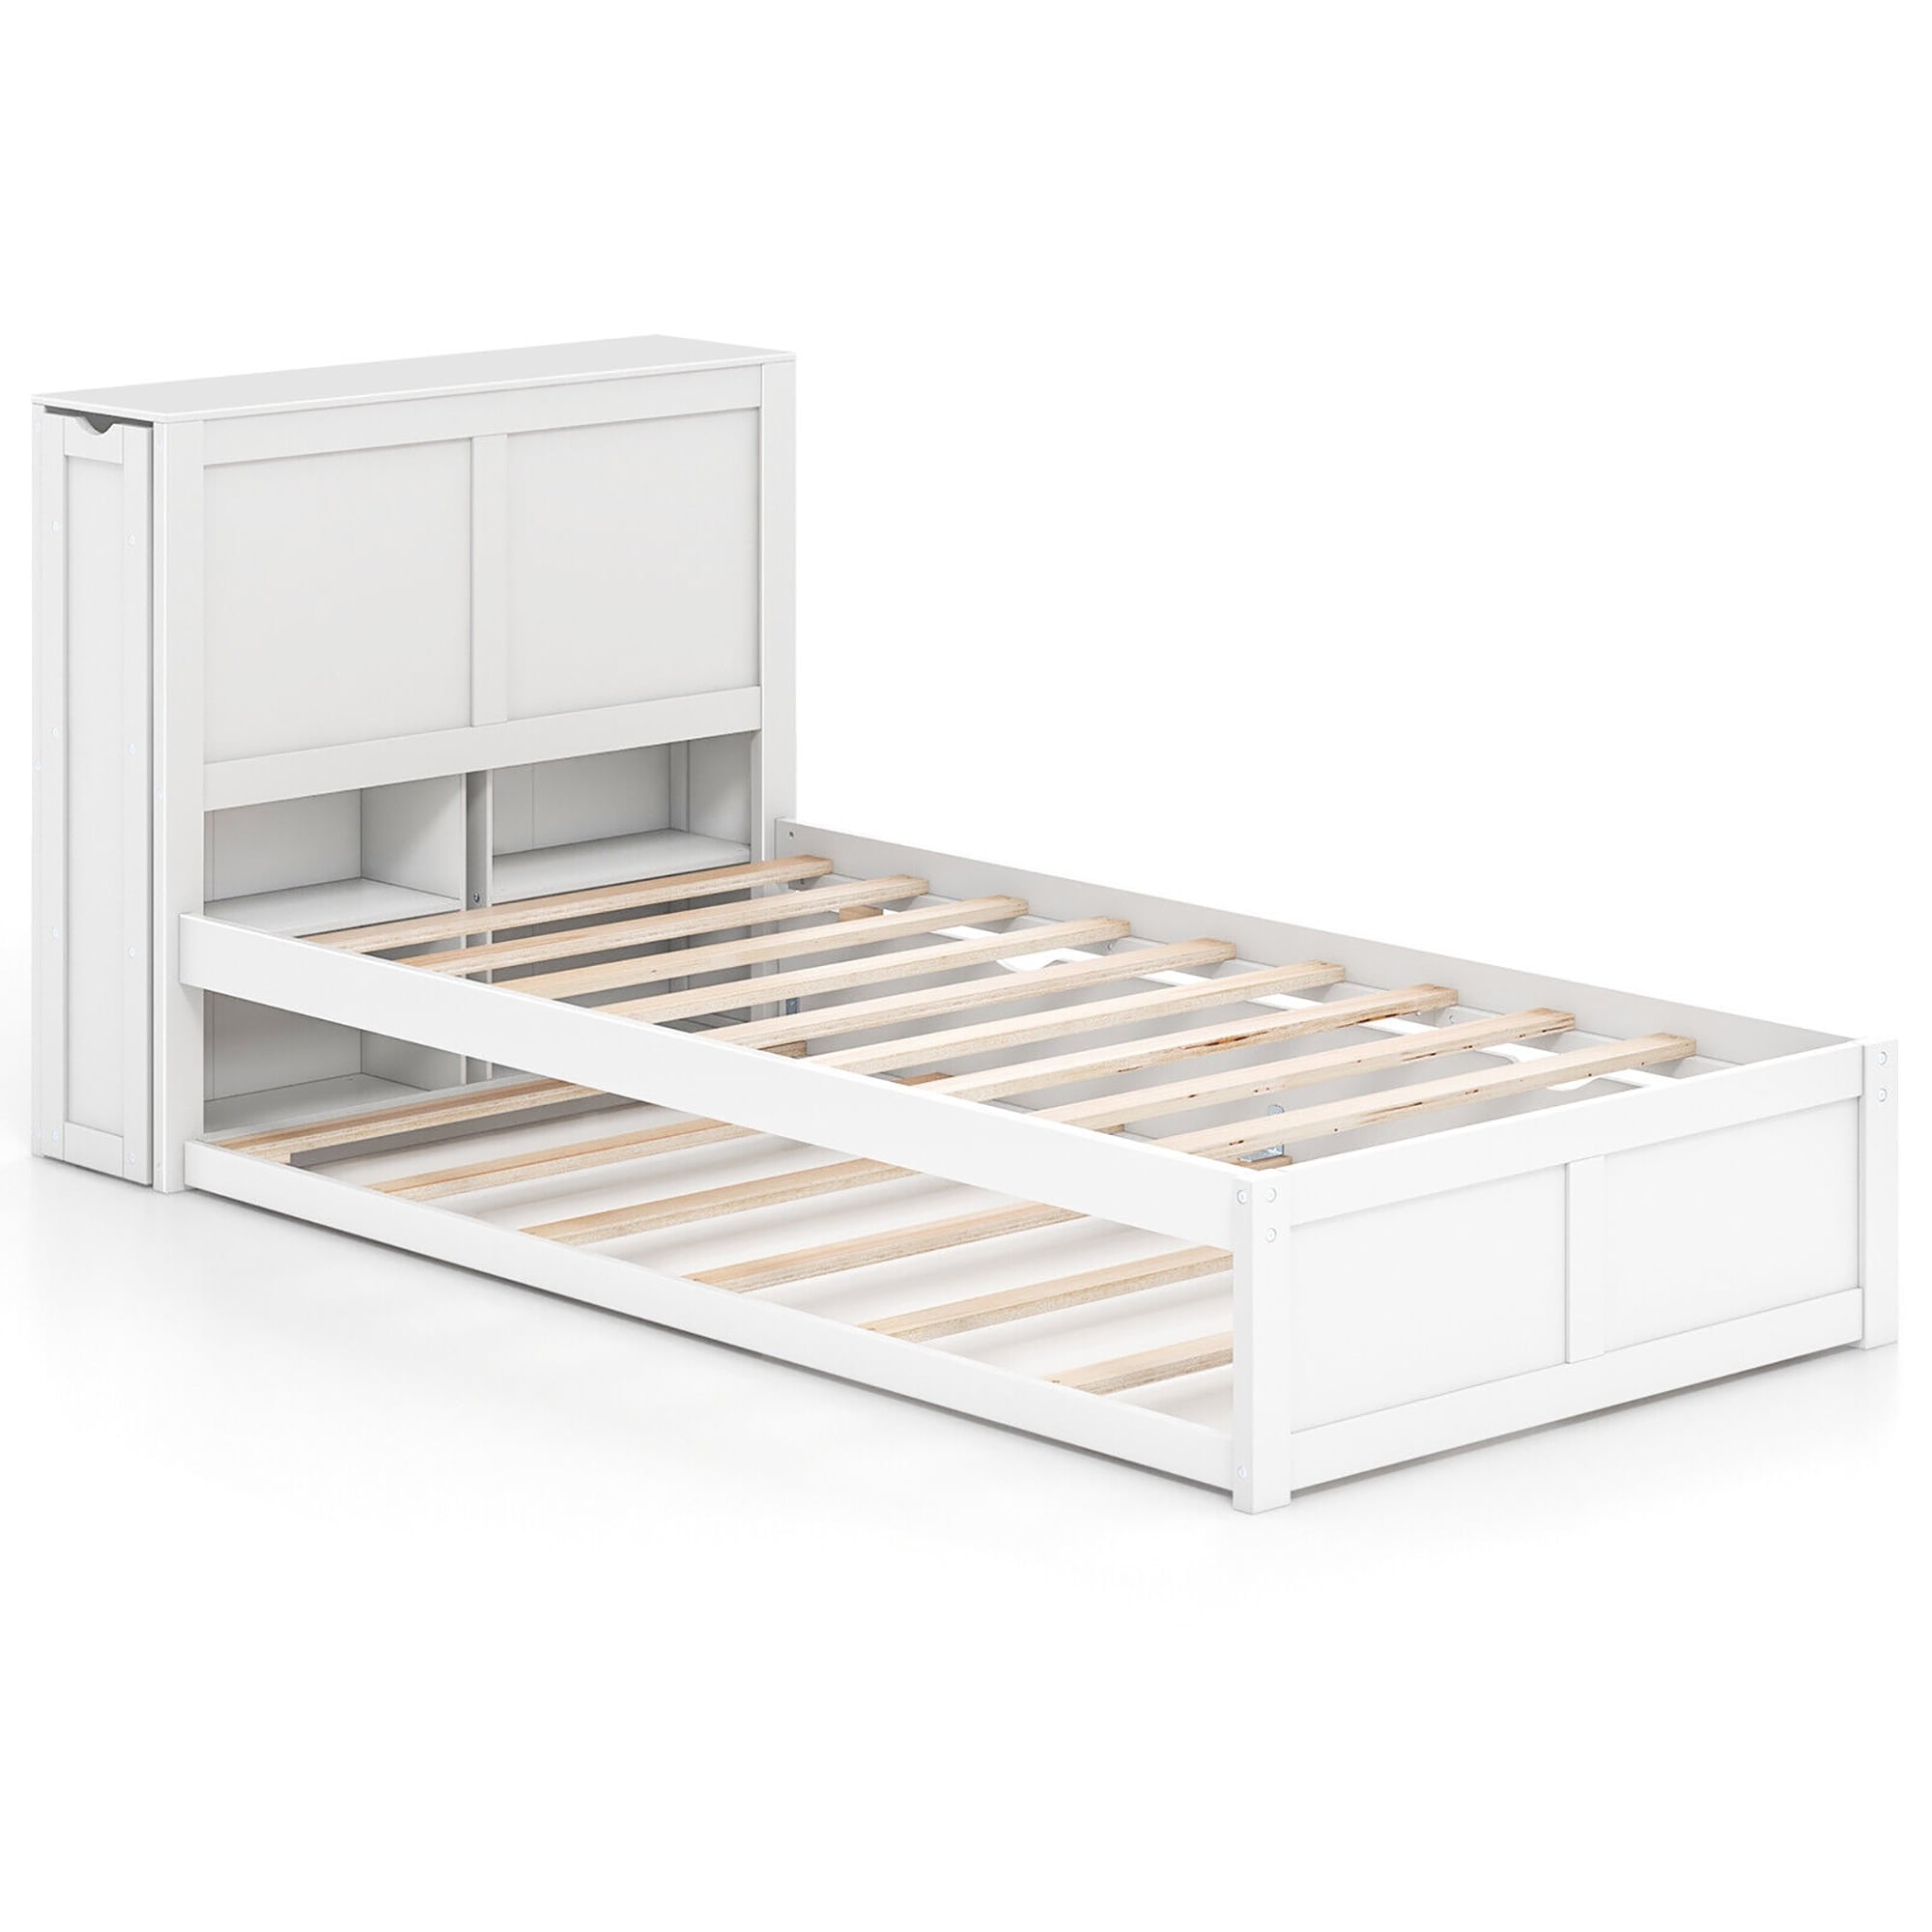 Gymax Full/Twin Wooden Platform Bed with Trundle Storage Headboard